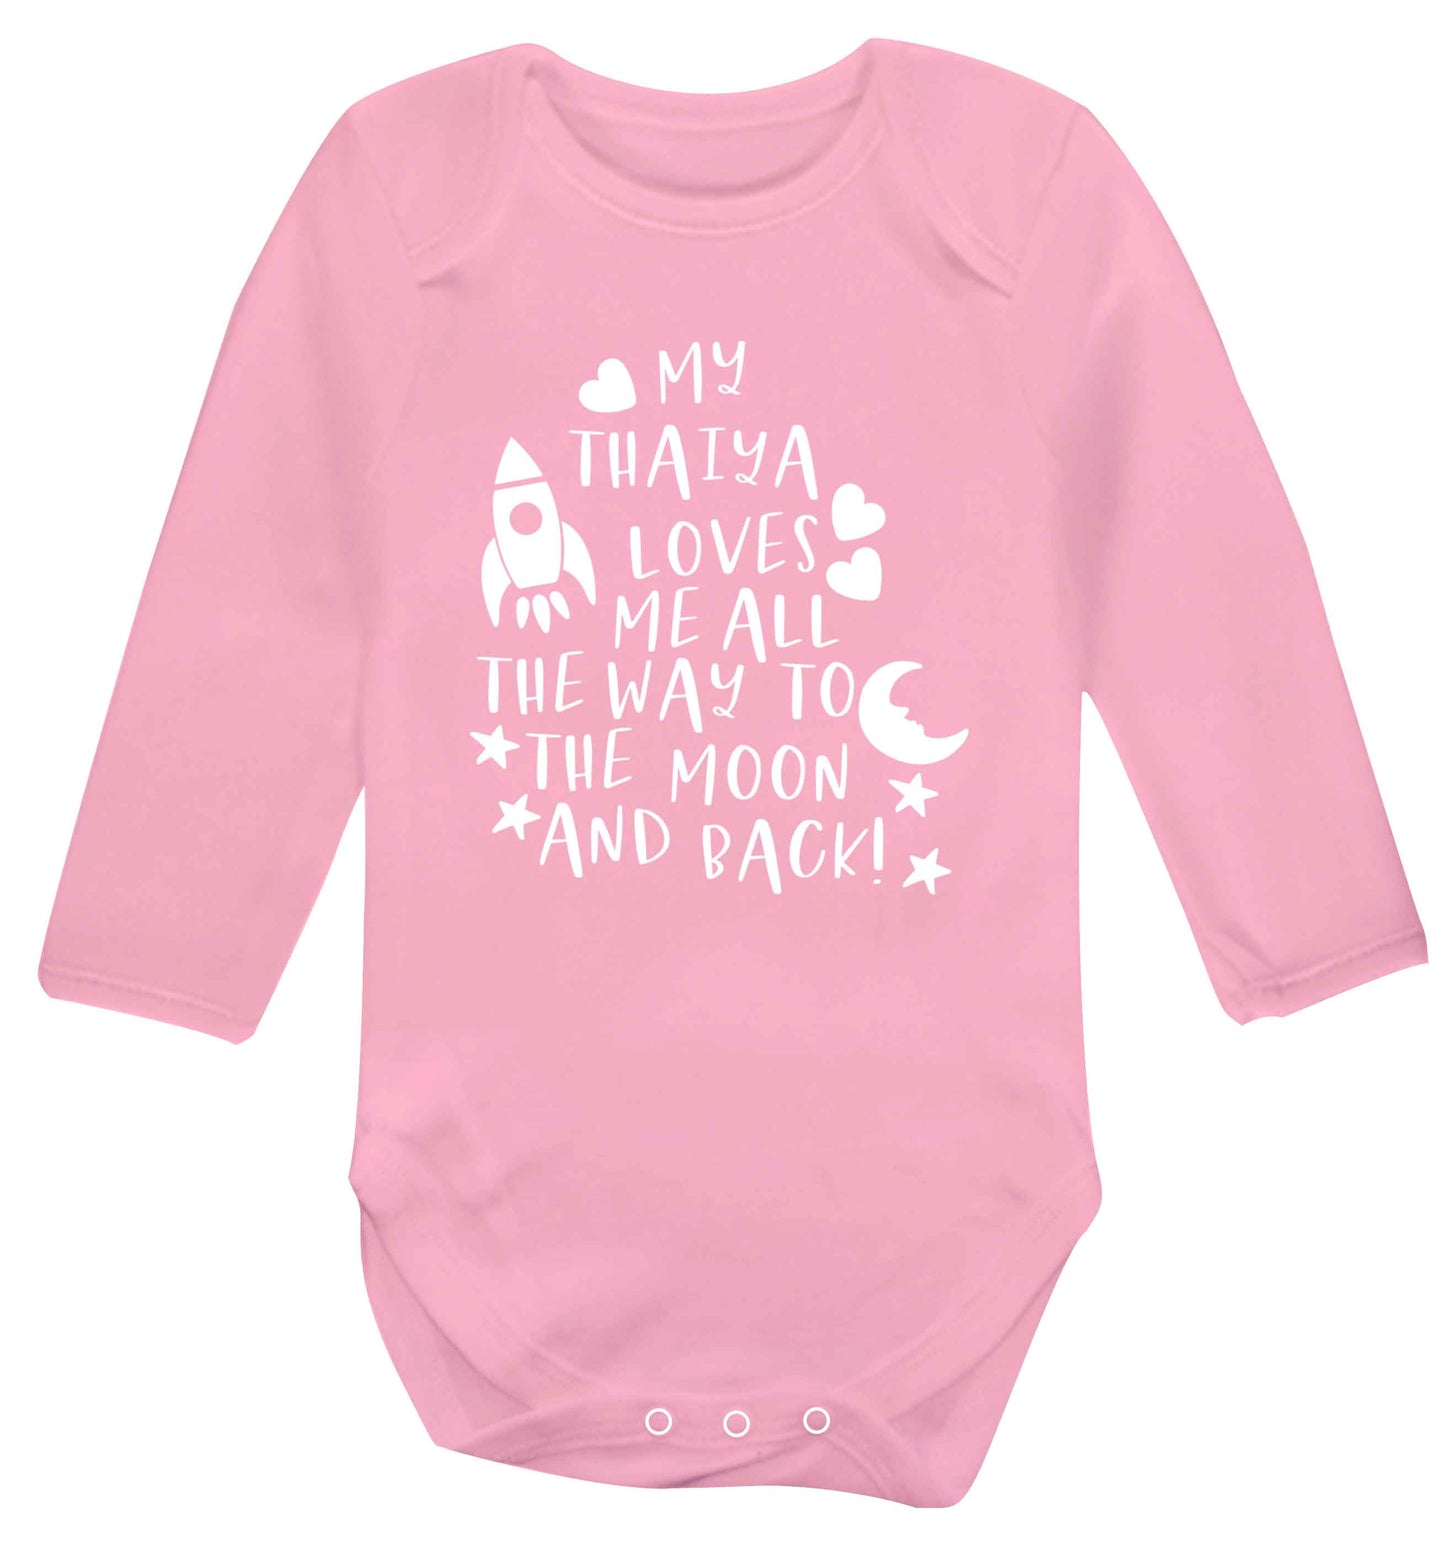 My thaiya loves me all the way to the moon and back Baby Vest long sleeved pale pink 6-12 months